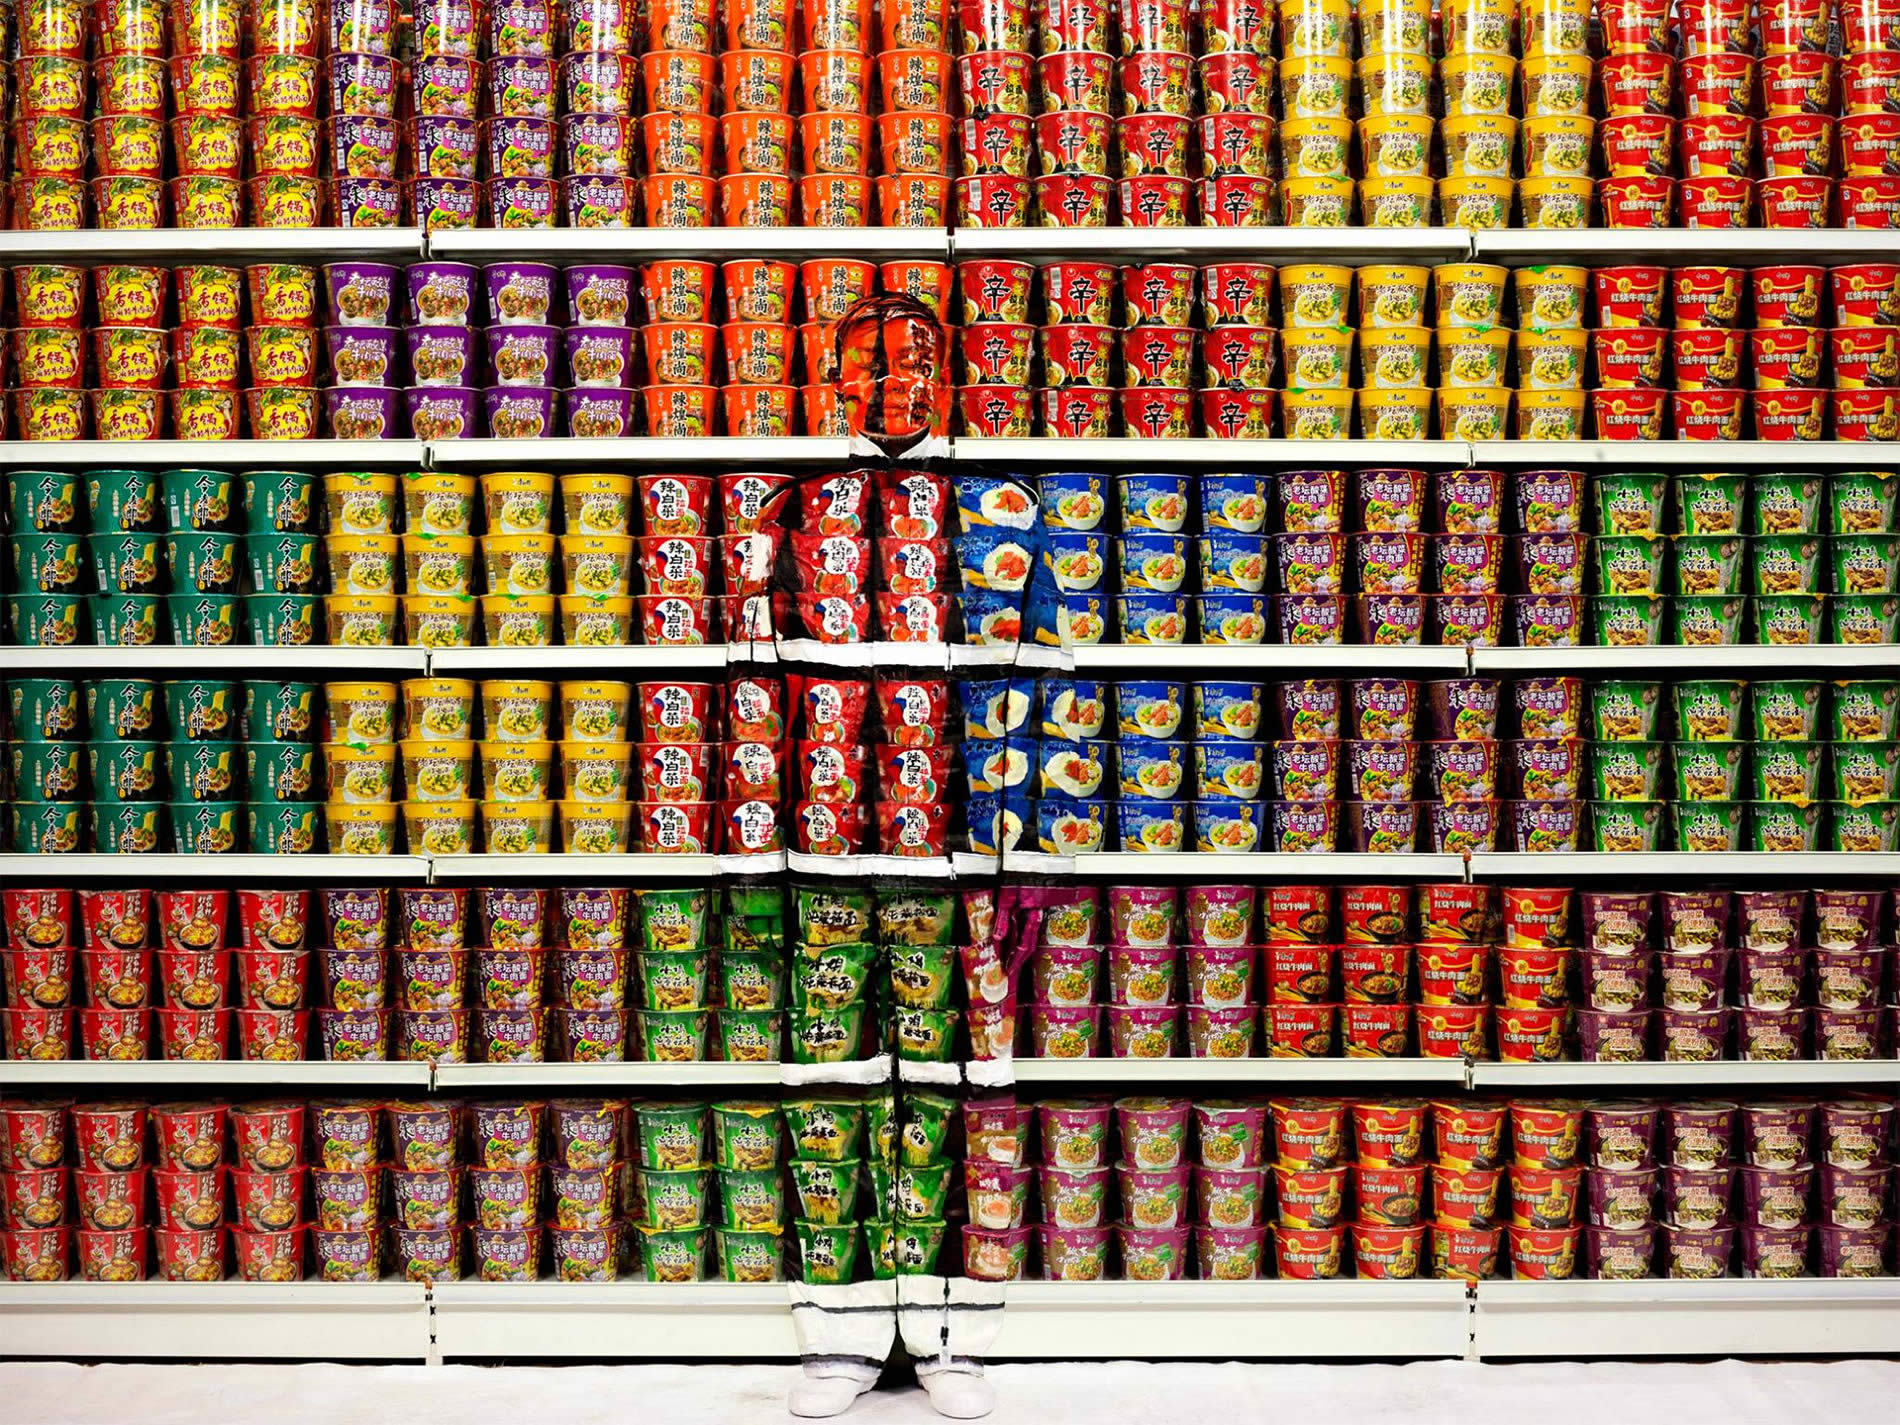 bolin in supermarket wall of cans